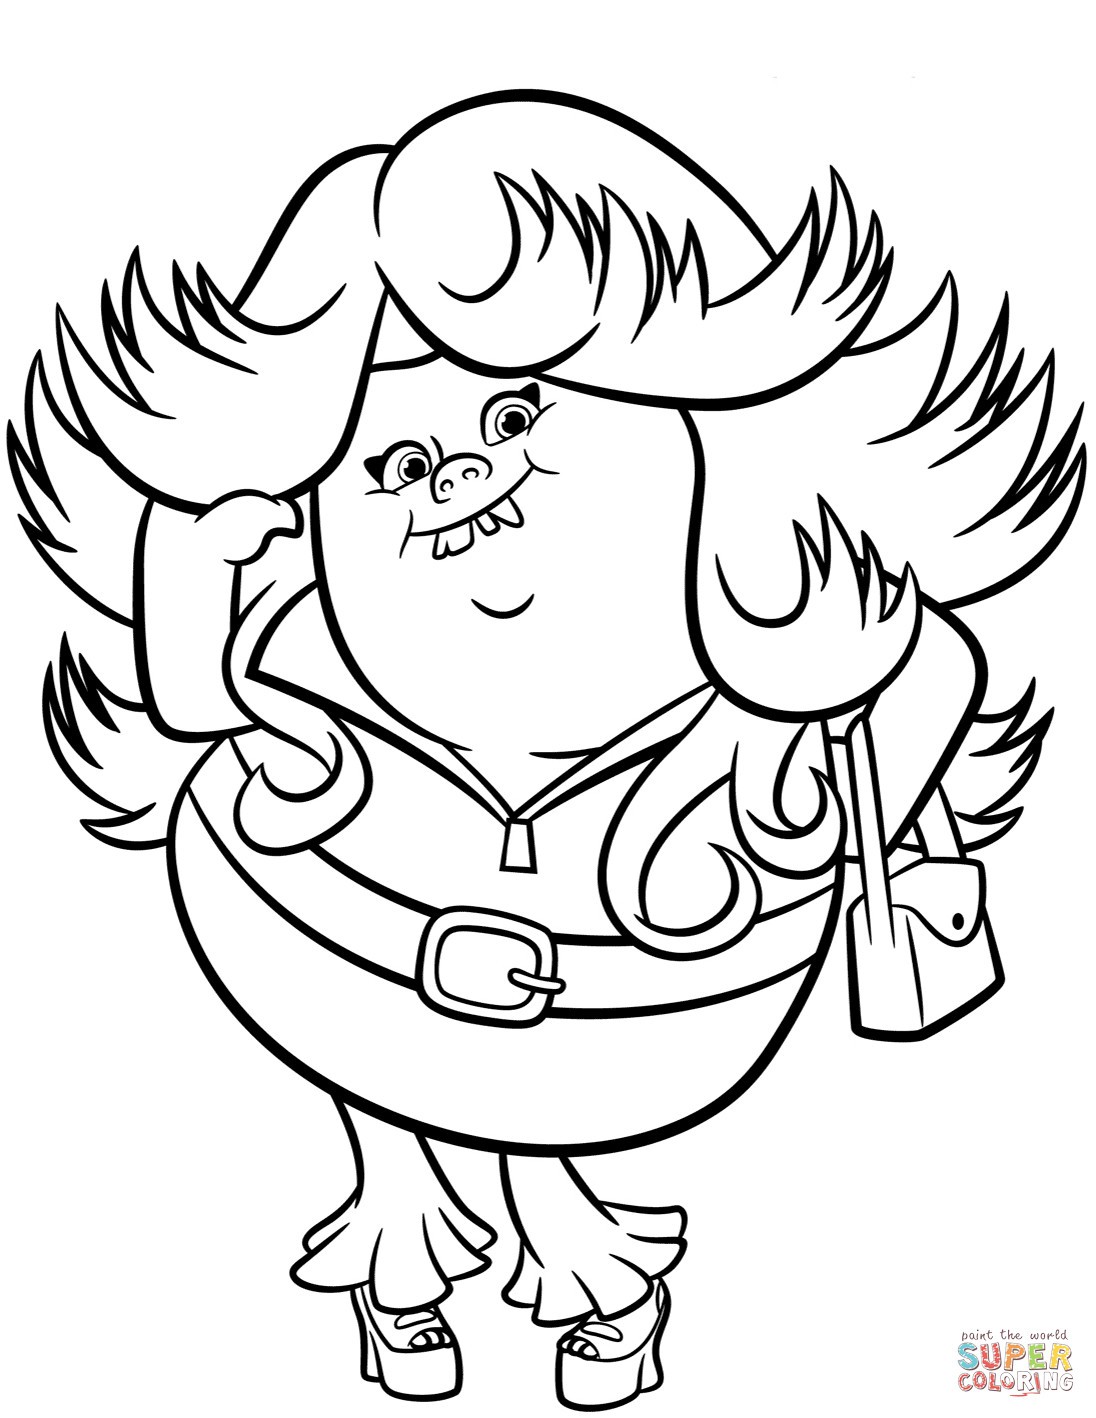 Lady Glitter Sparkles Trolls Coloring Pages Wallpaper